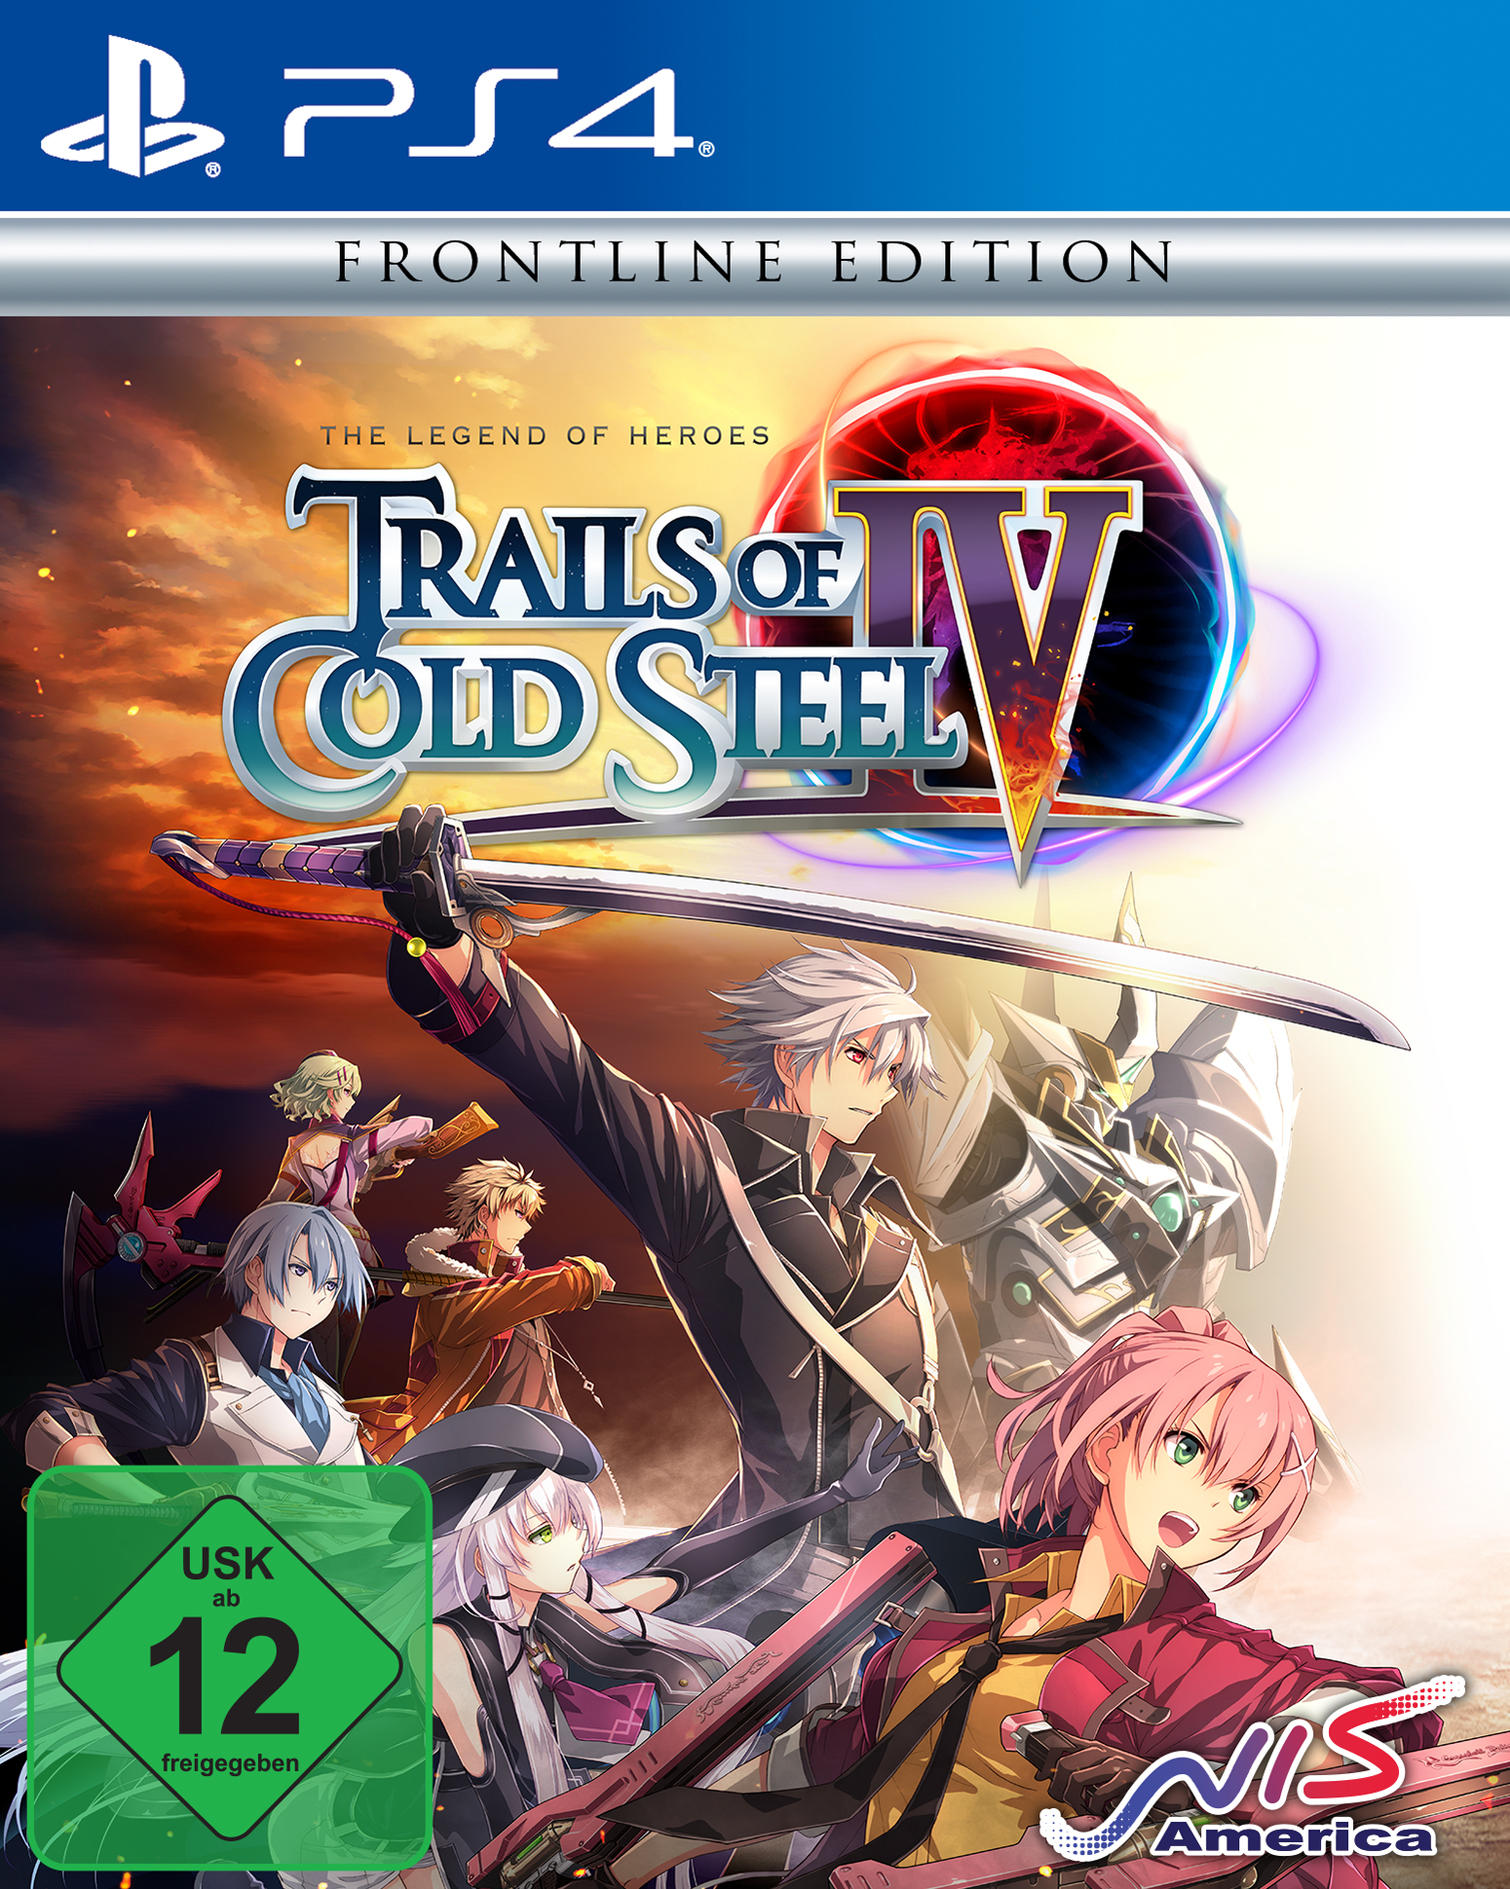 OF HEROES: STEEL - COLD PS4 LEGEND FE TR. 4] OF IV THE [PlayStation